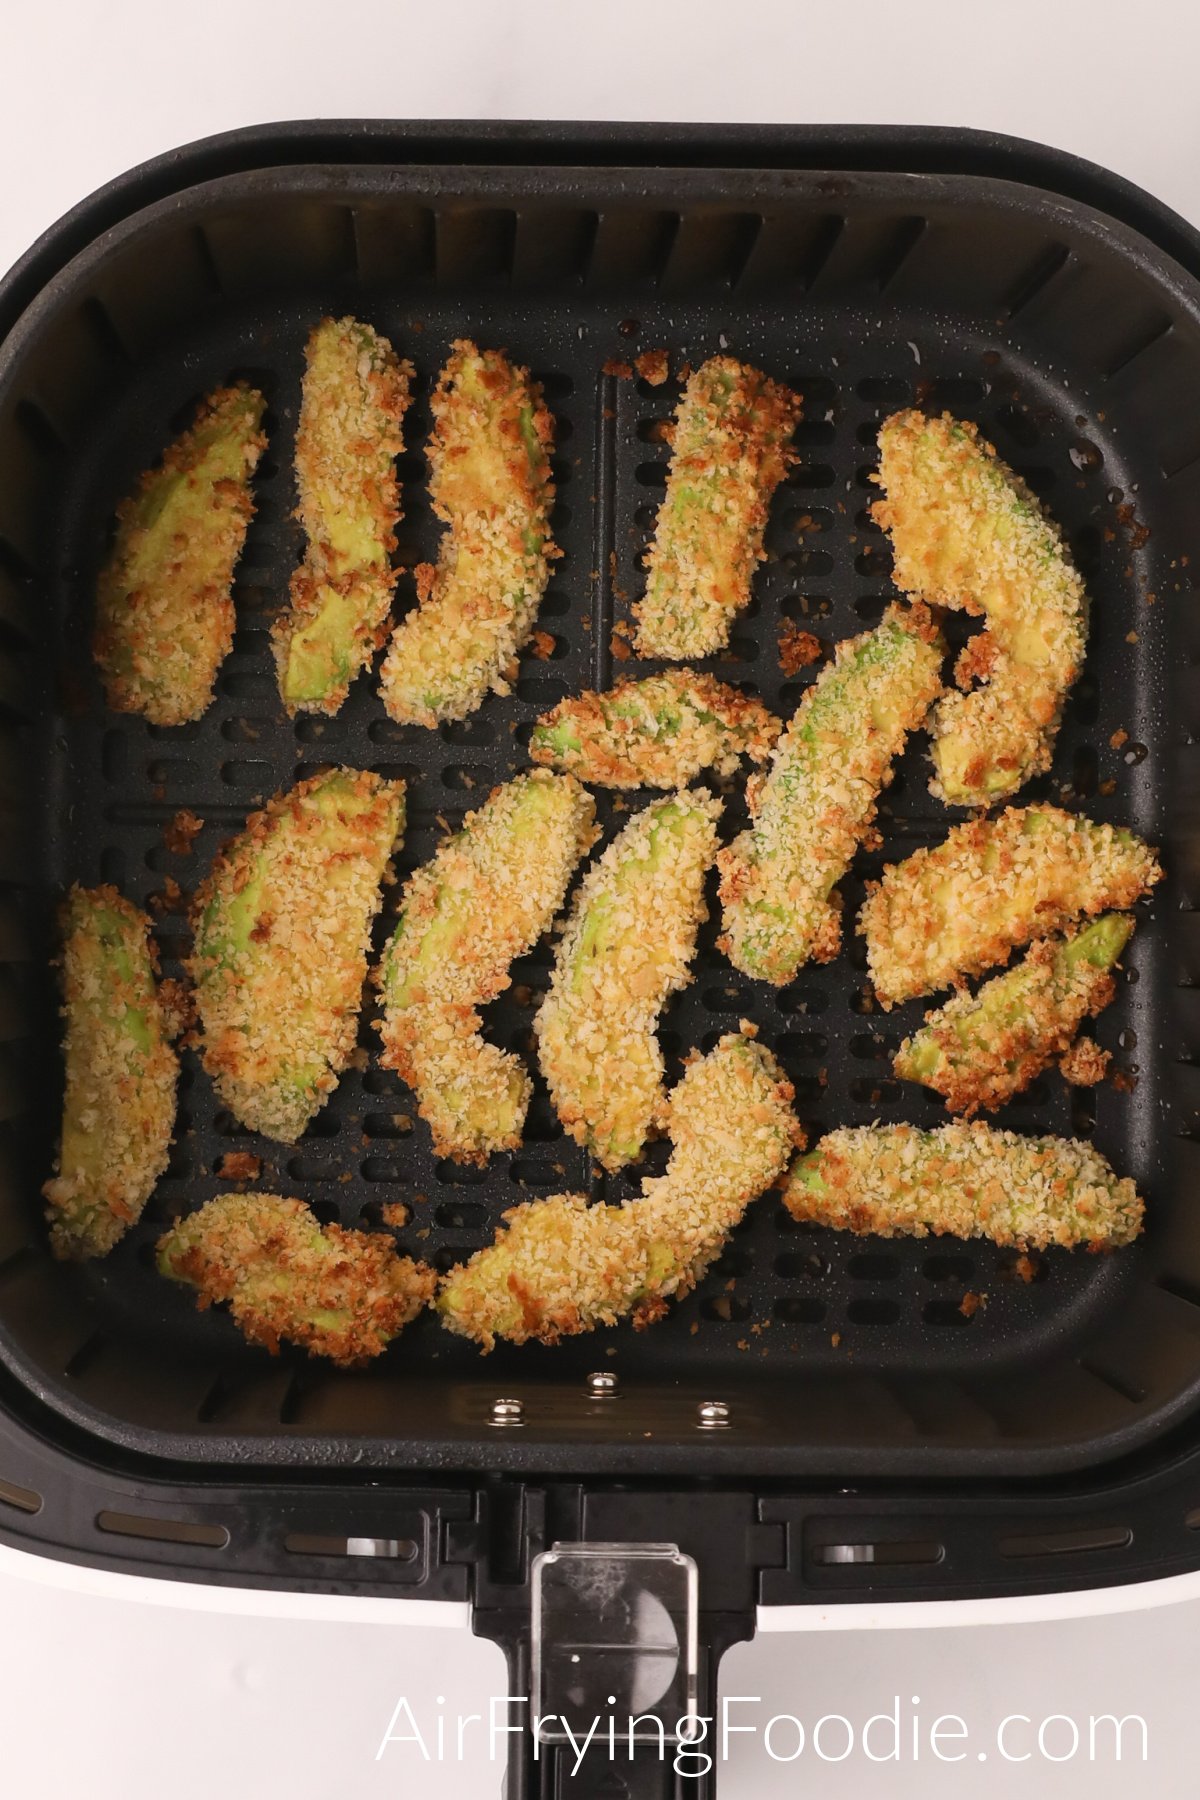 Avocado fries in the basket of the air fryer, fully cooked and ready to serve.